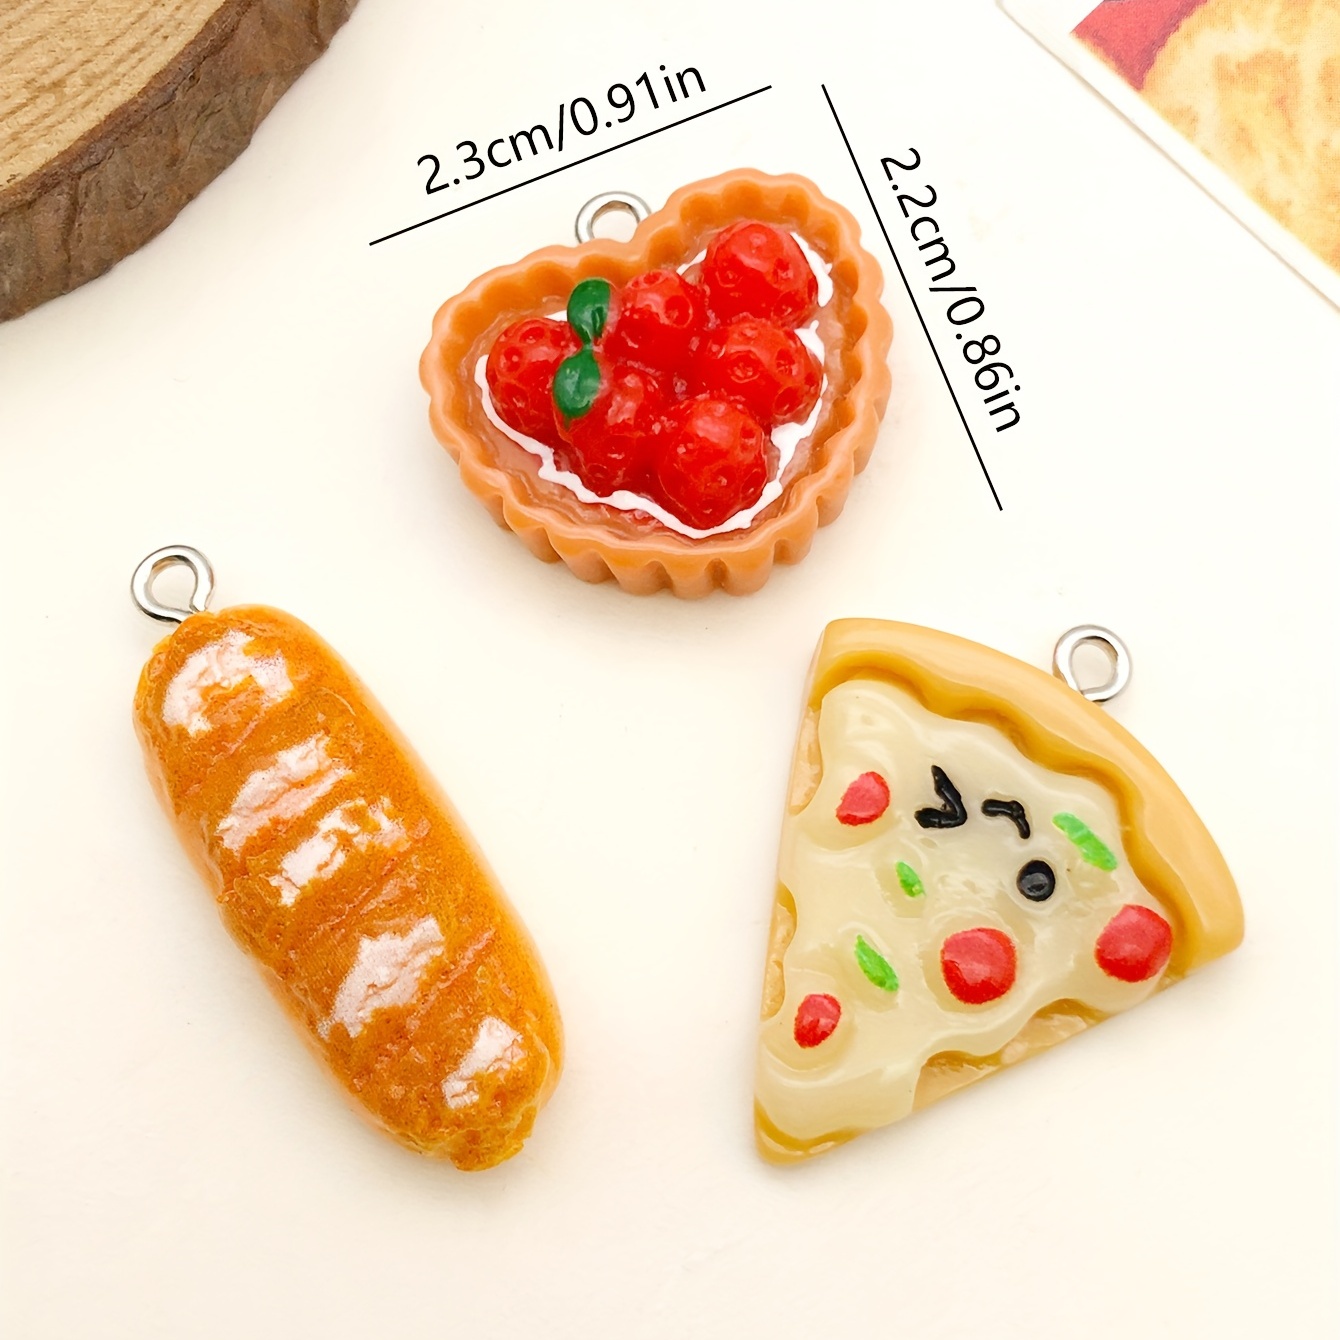 Imitation Food Charms, Bread Jewelry Charm, Bread Resin Charms